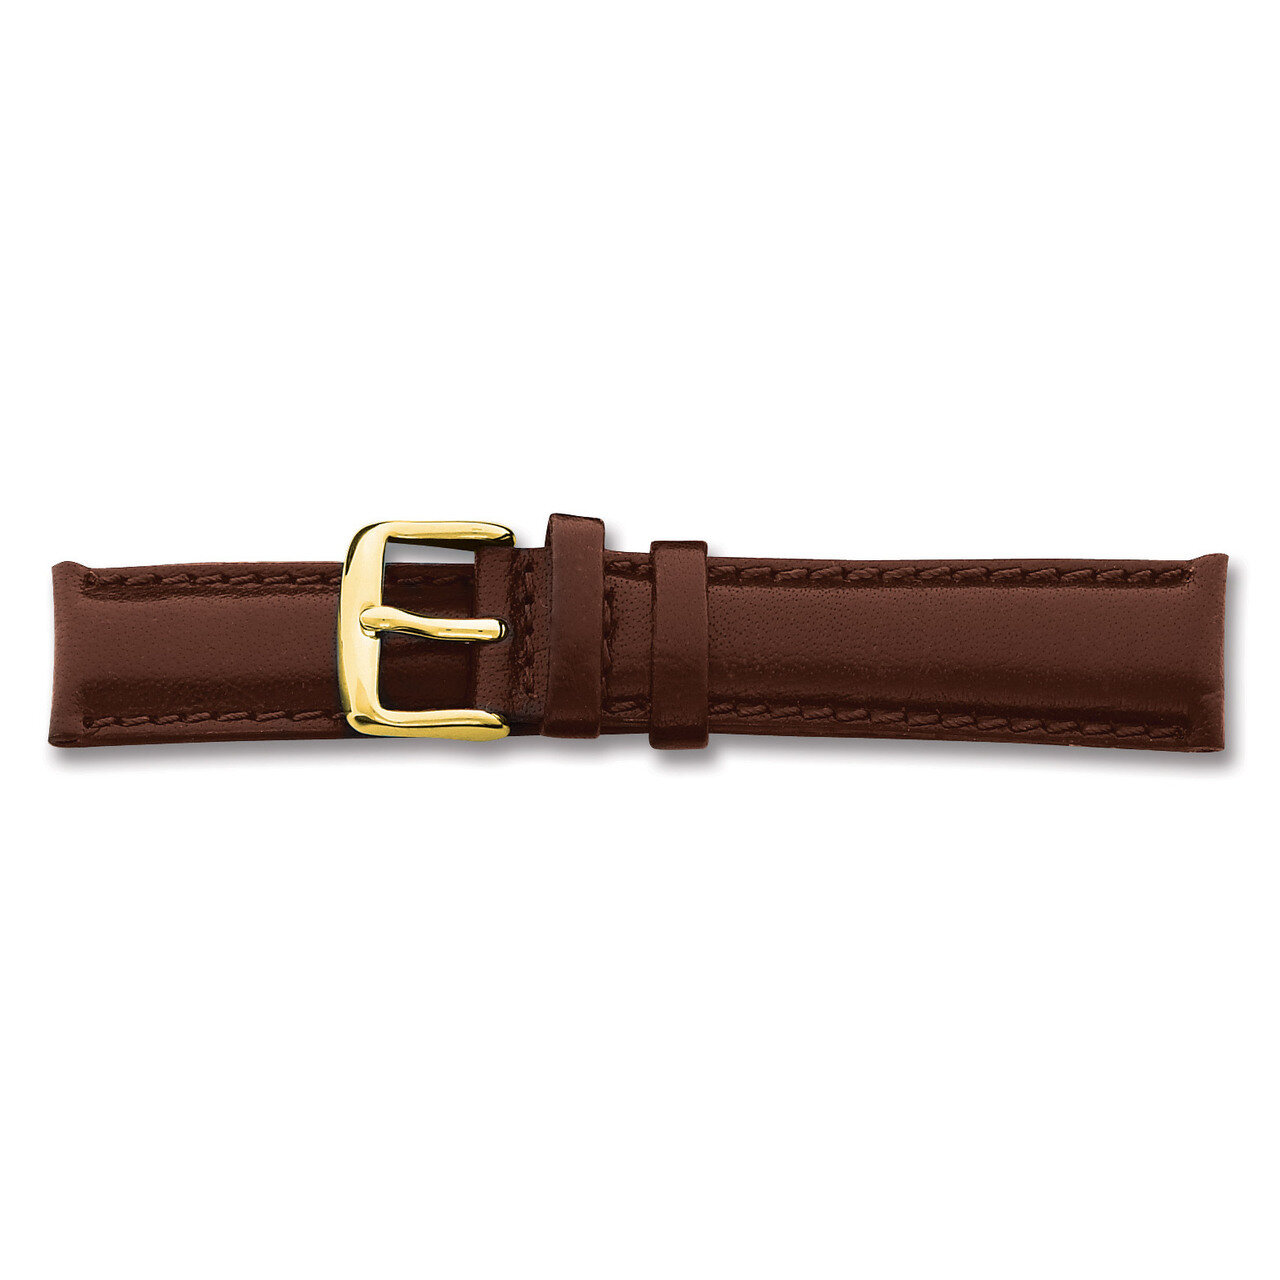 20mm Brown Smooth Leather Chrono Buckle Watch Band 7.5 Inch Gold-tone BAY140-20